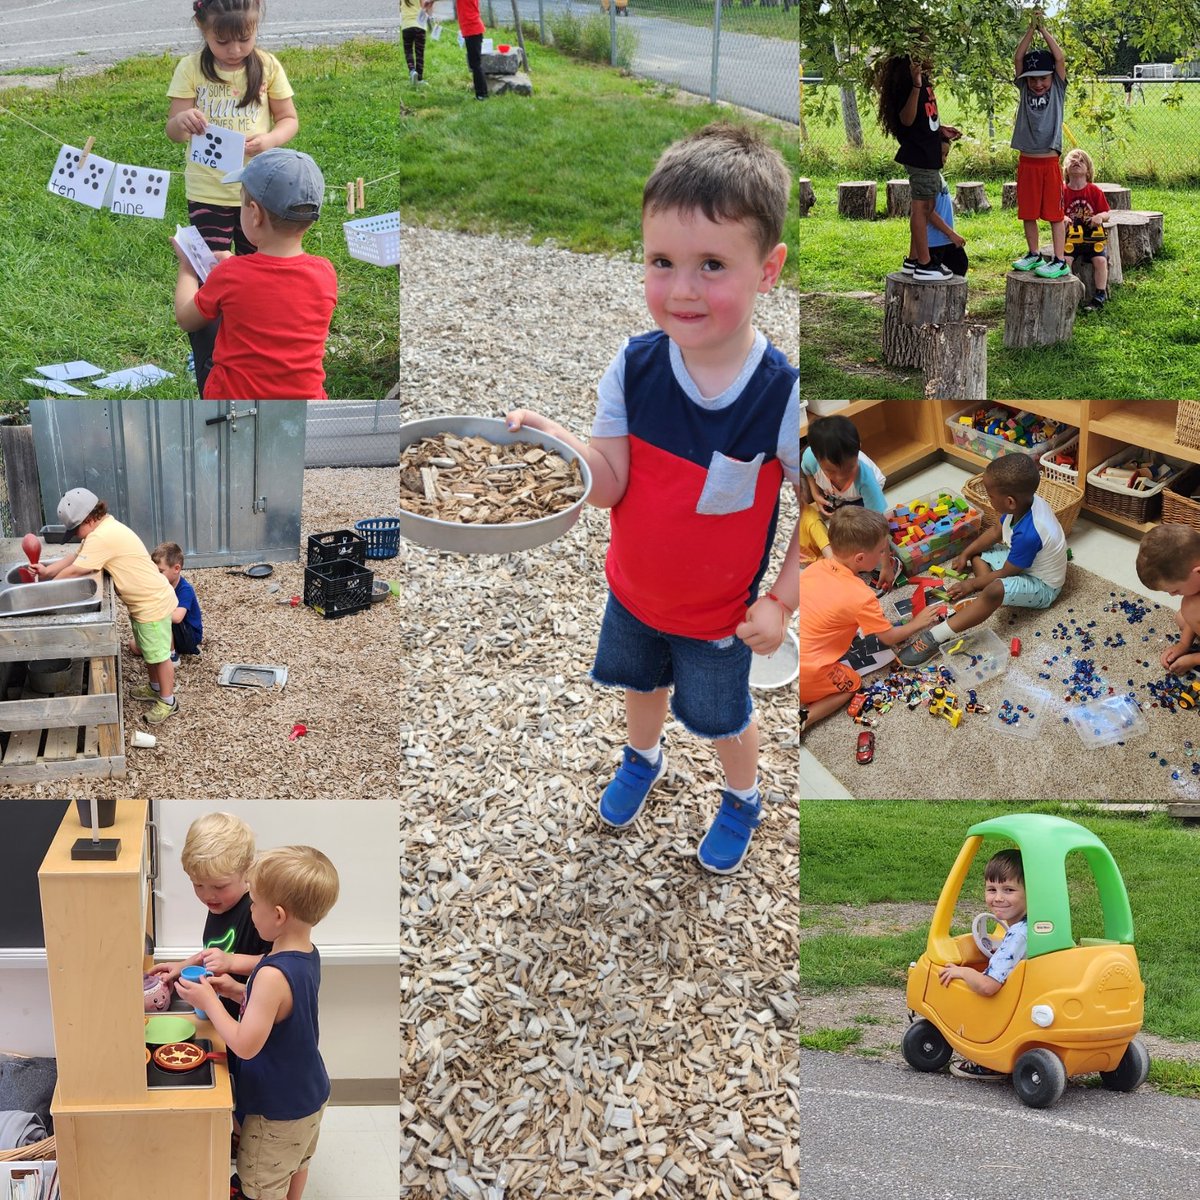 Exploration, collaboration, play and getting to know each other during our first week together, so much fun despite that heat!
#outdoorclassroom #kindergarten 
@BayridgePS_LDSB